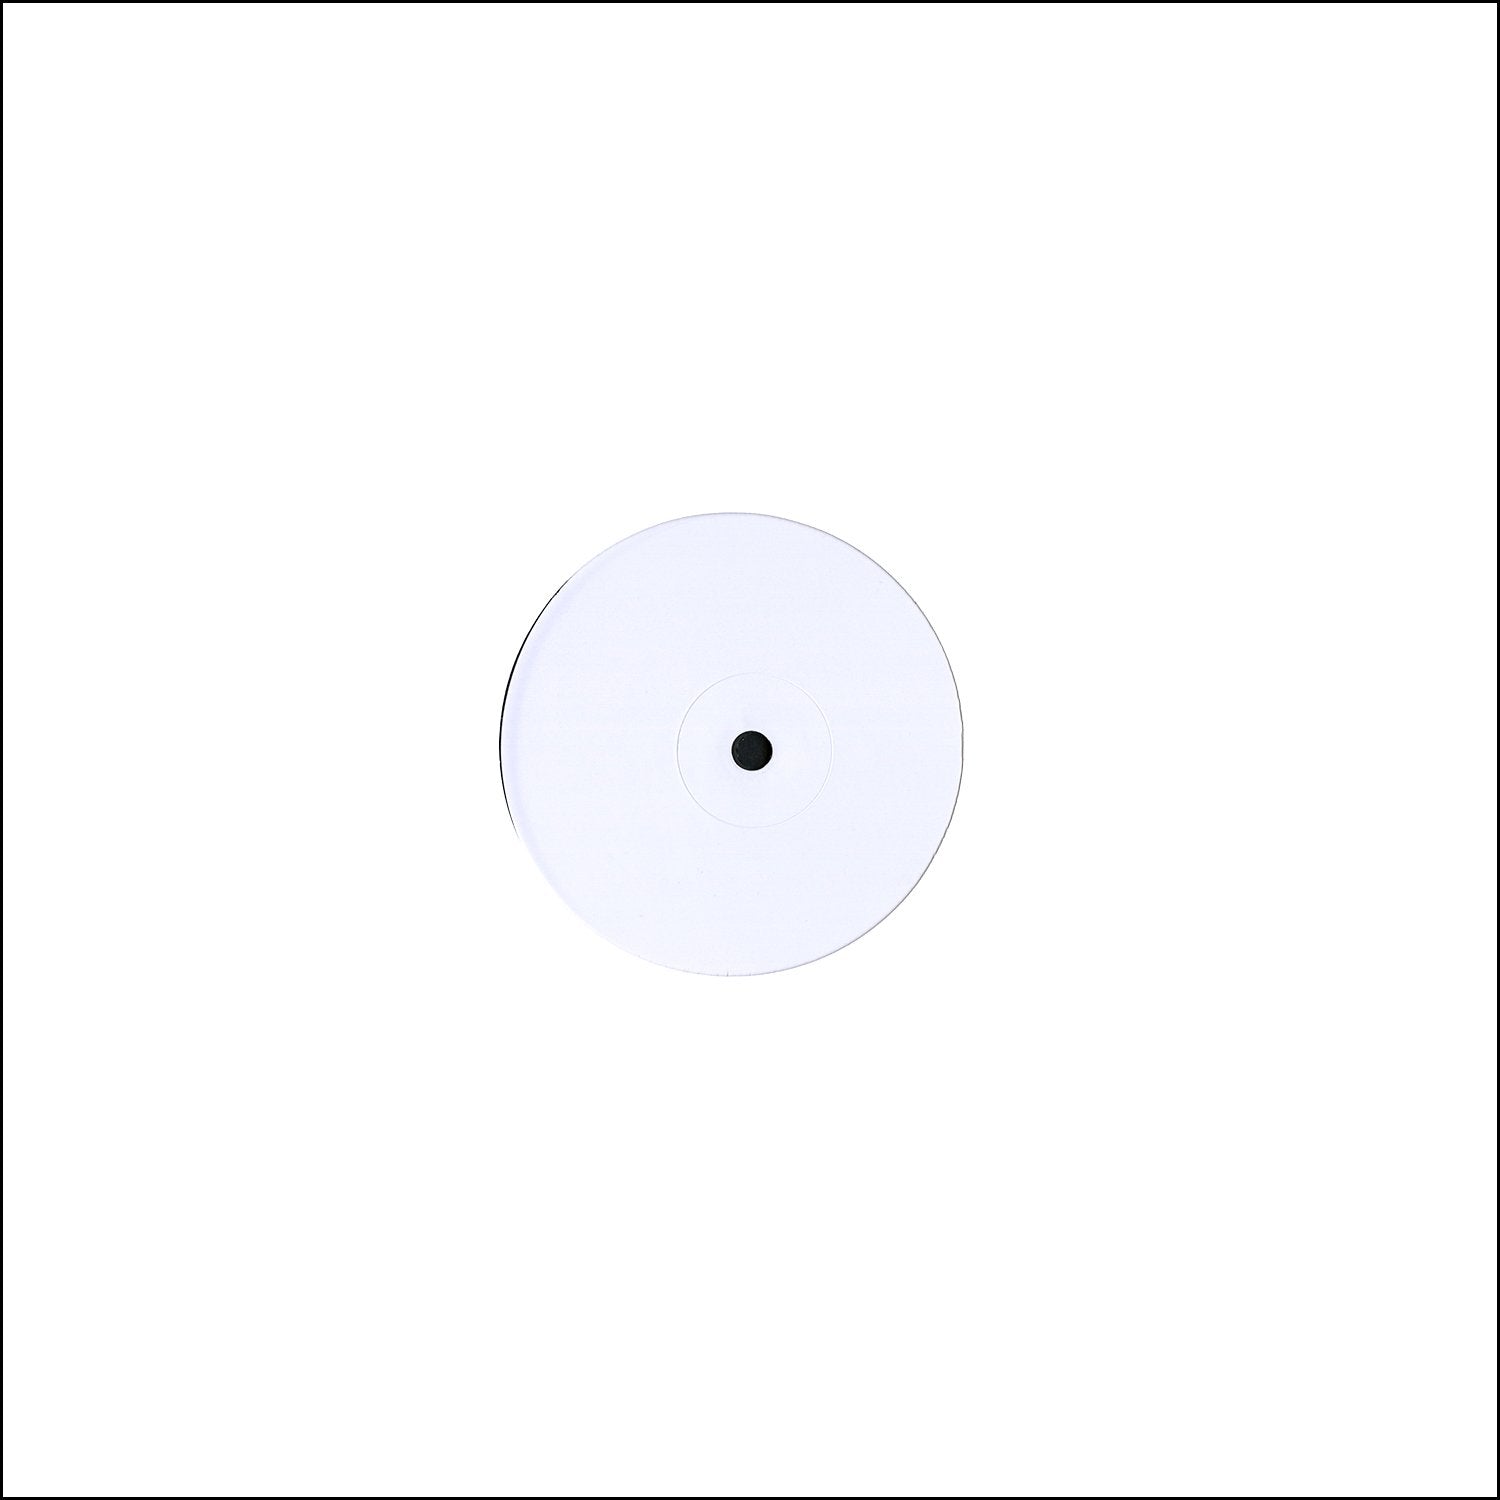 Sessions '64!! [Test Pressing]